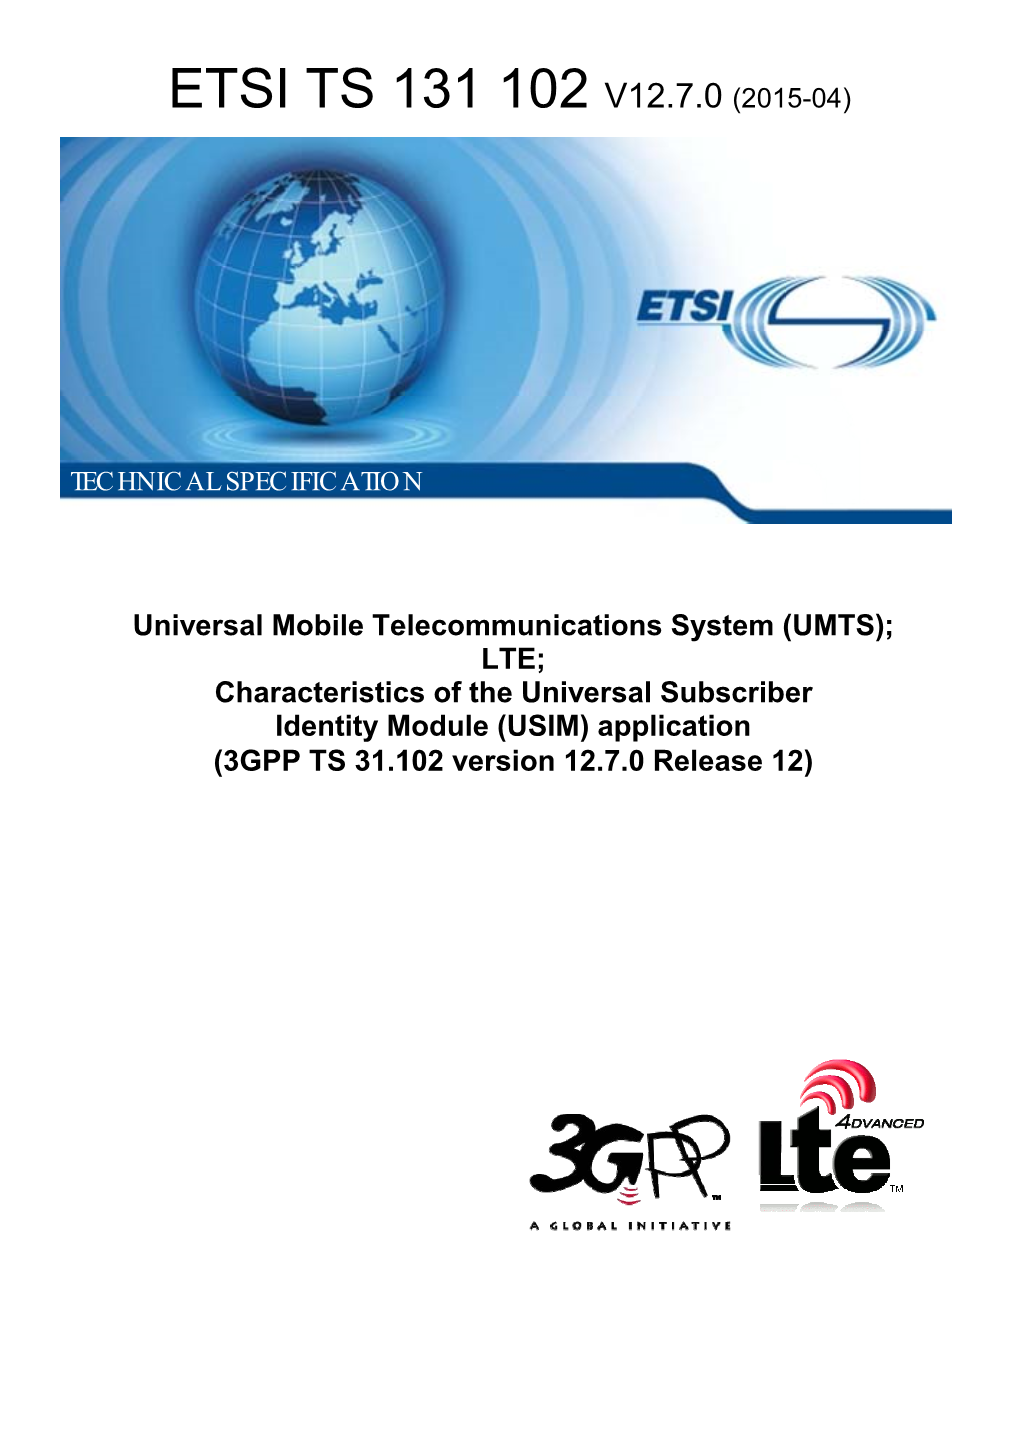 LTE; Characteristicsics of the Universal Subscribeiber Identity Mmodule (USIM) Application (3GPP TS 31.1.102 Version 12.7.0 Release 12)